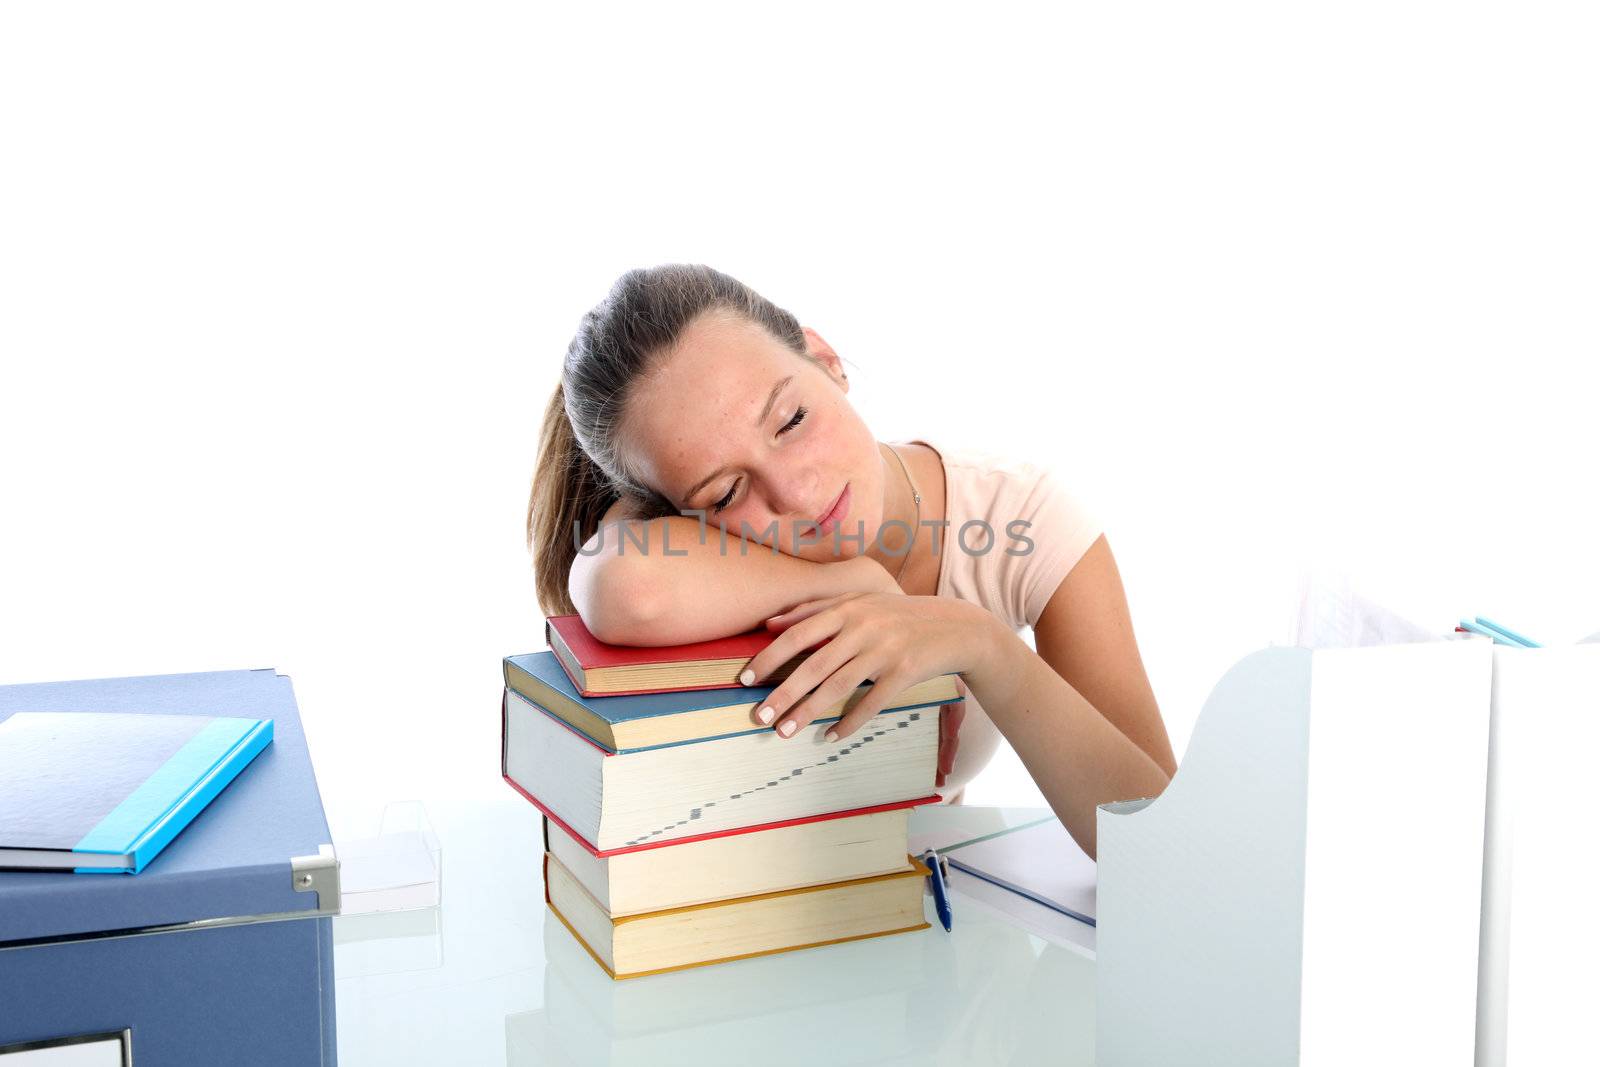 Exhausted young female college student sleeping on top of her books after a long stint of studying 